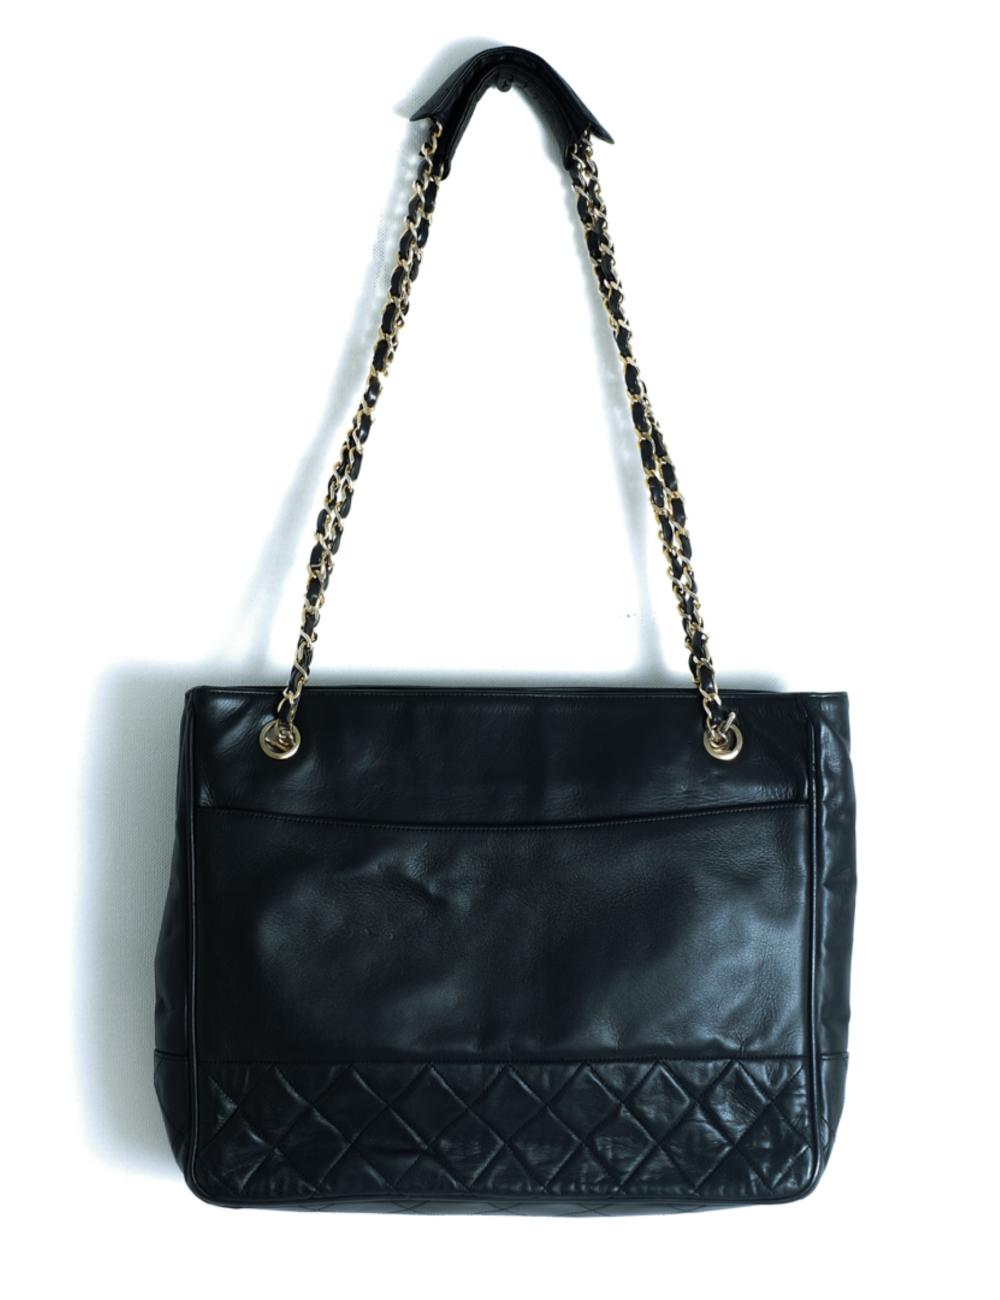 CHANEL VINTAGE BLACK LEATHER QUILTED 2d4609